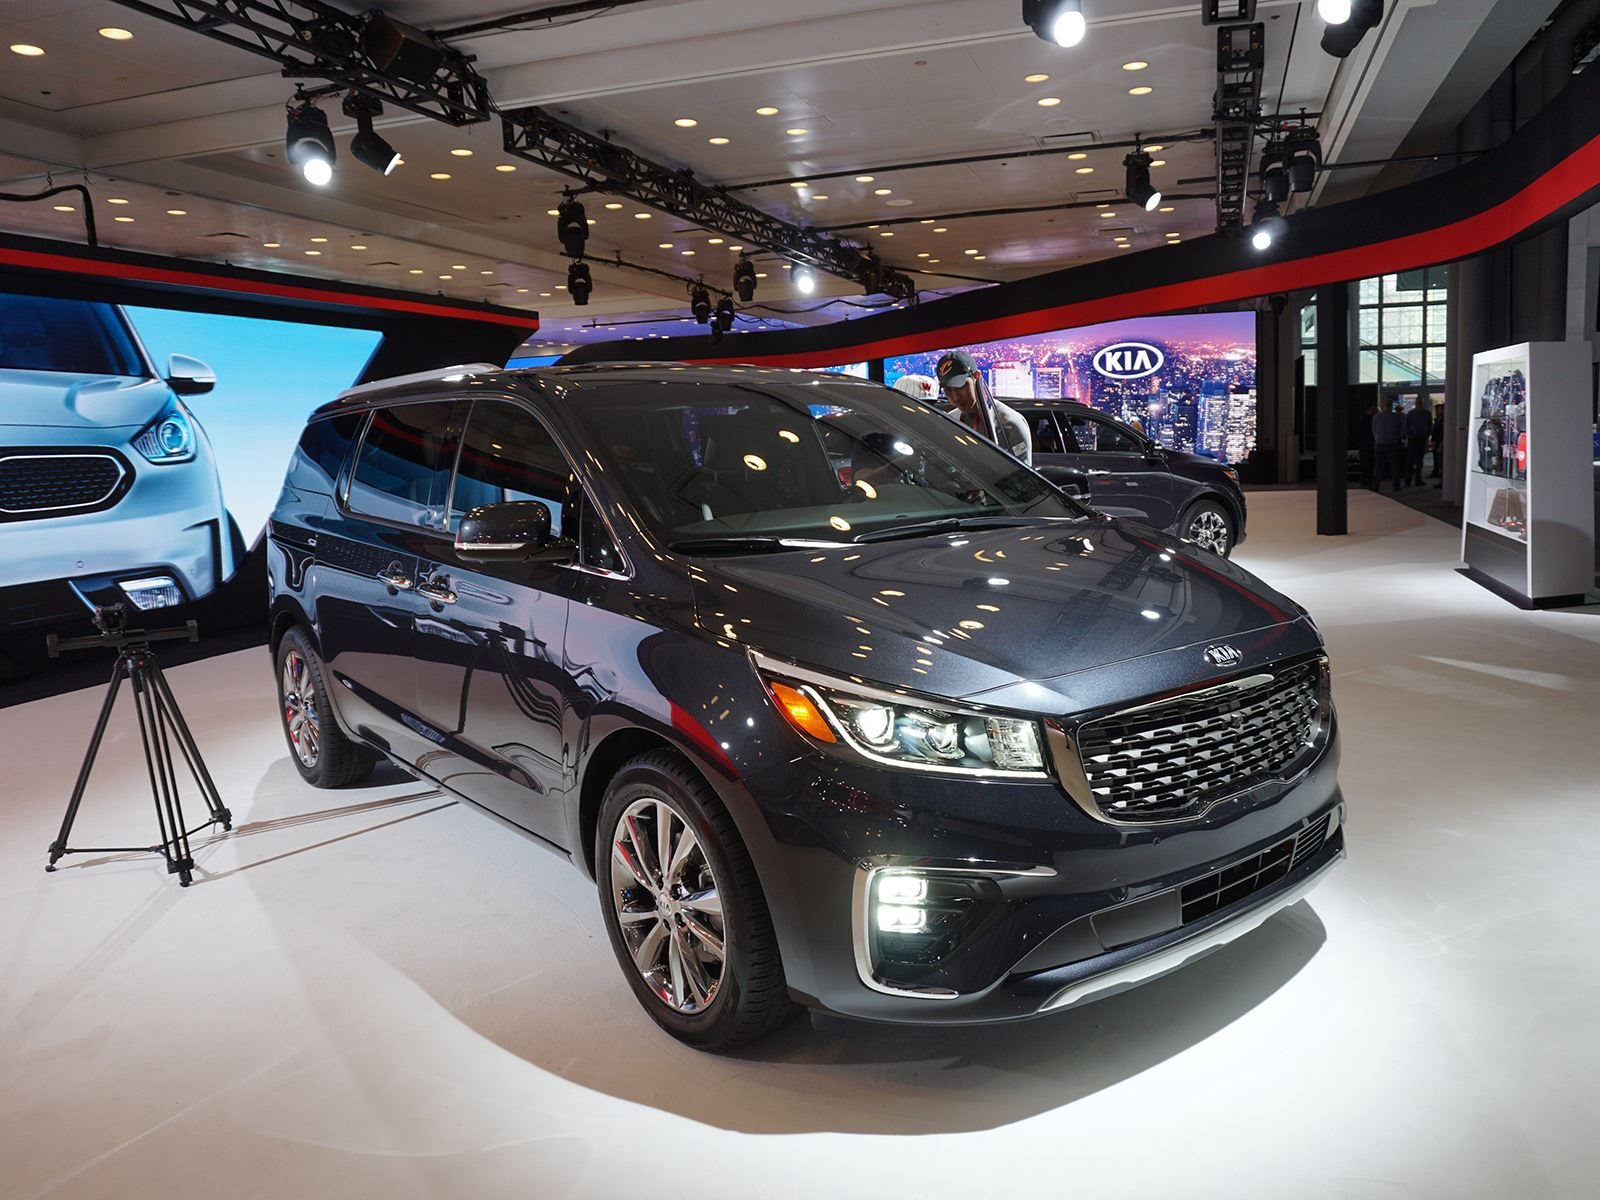 2019 Kia Sedona Debuts With Bold Styling And New Tech | CarBuzz